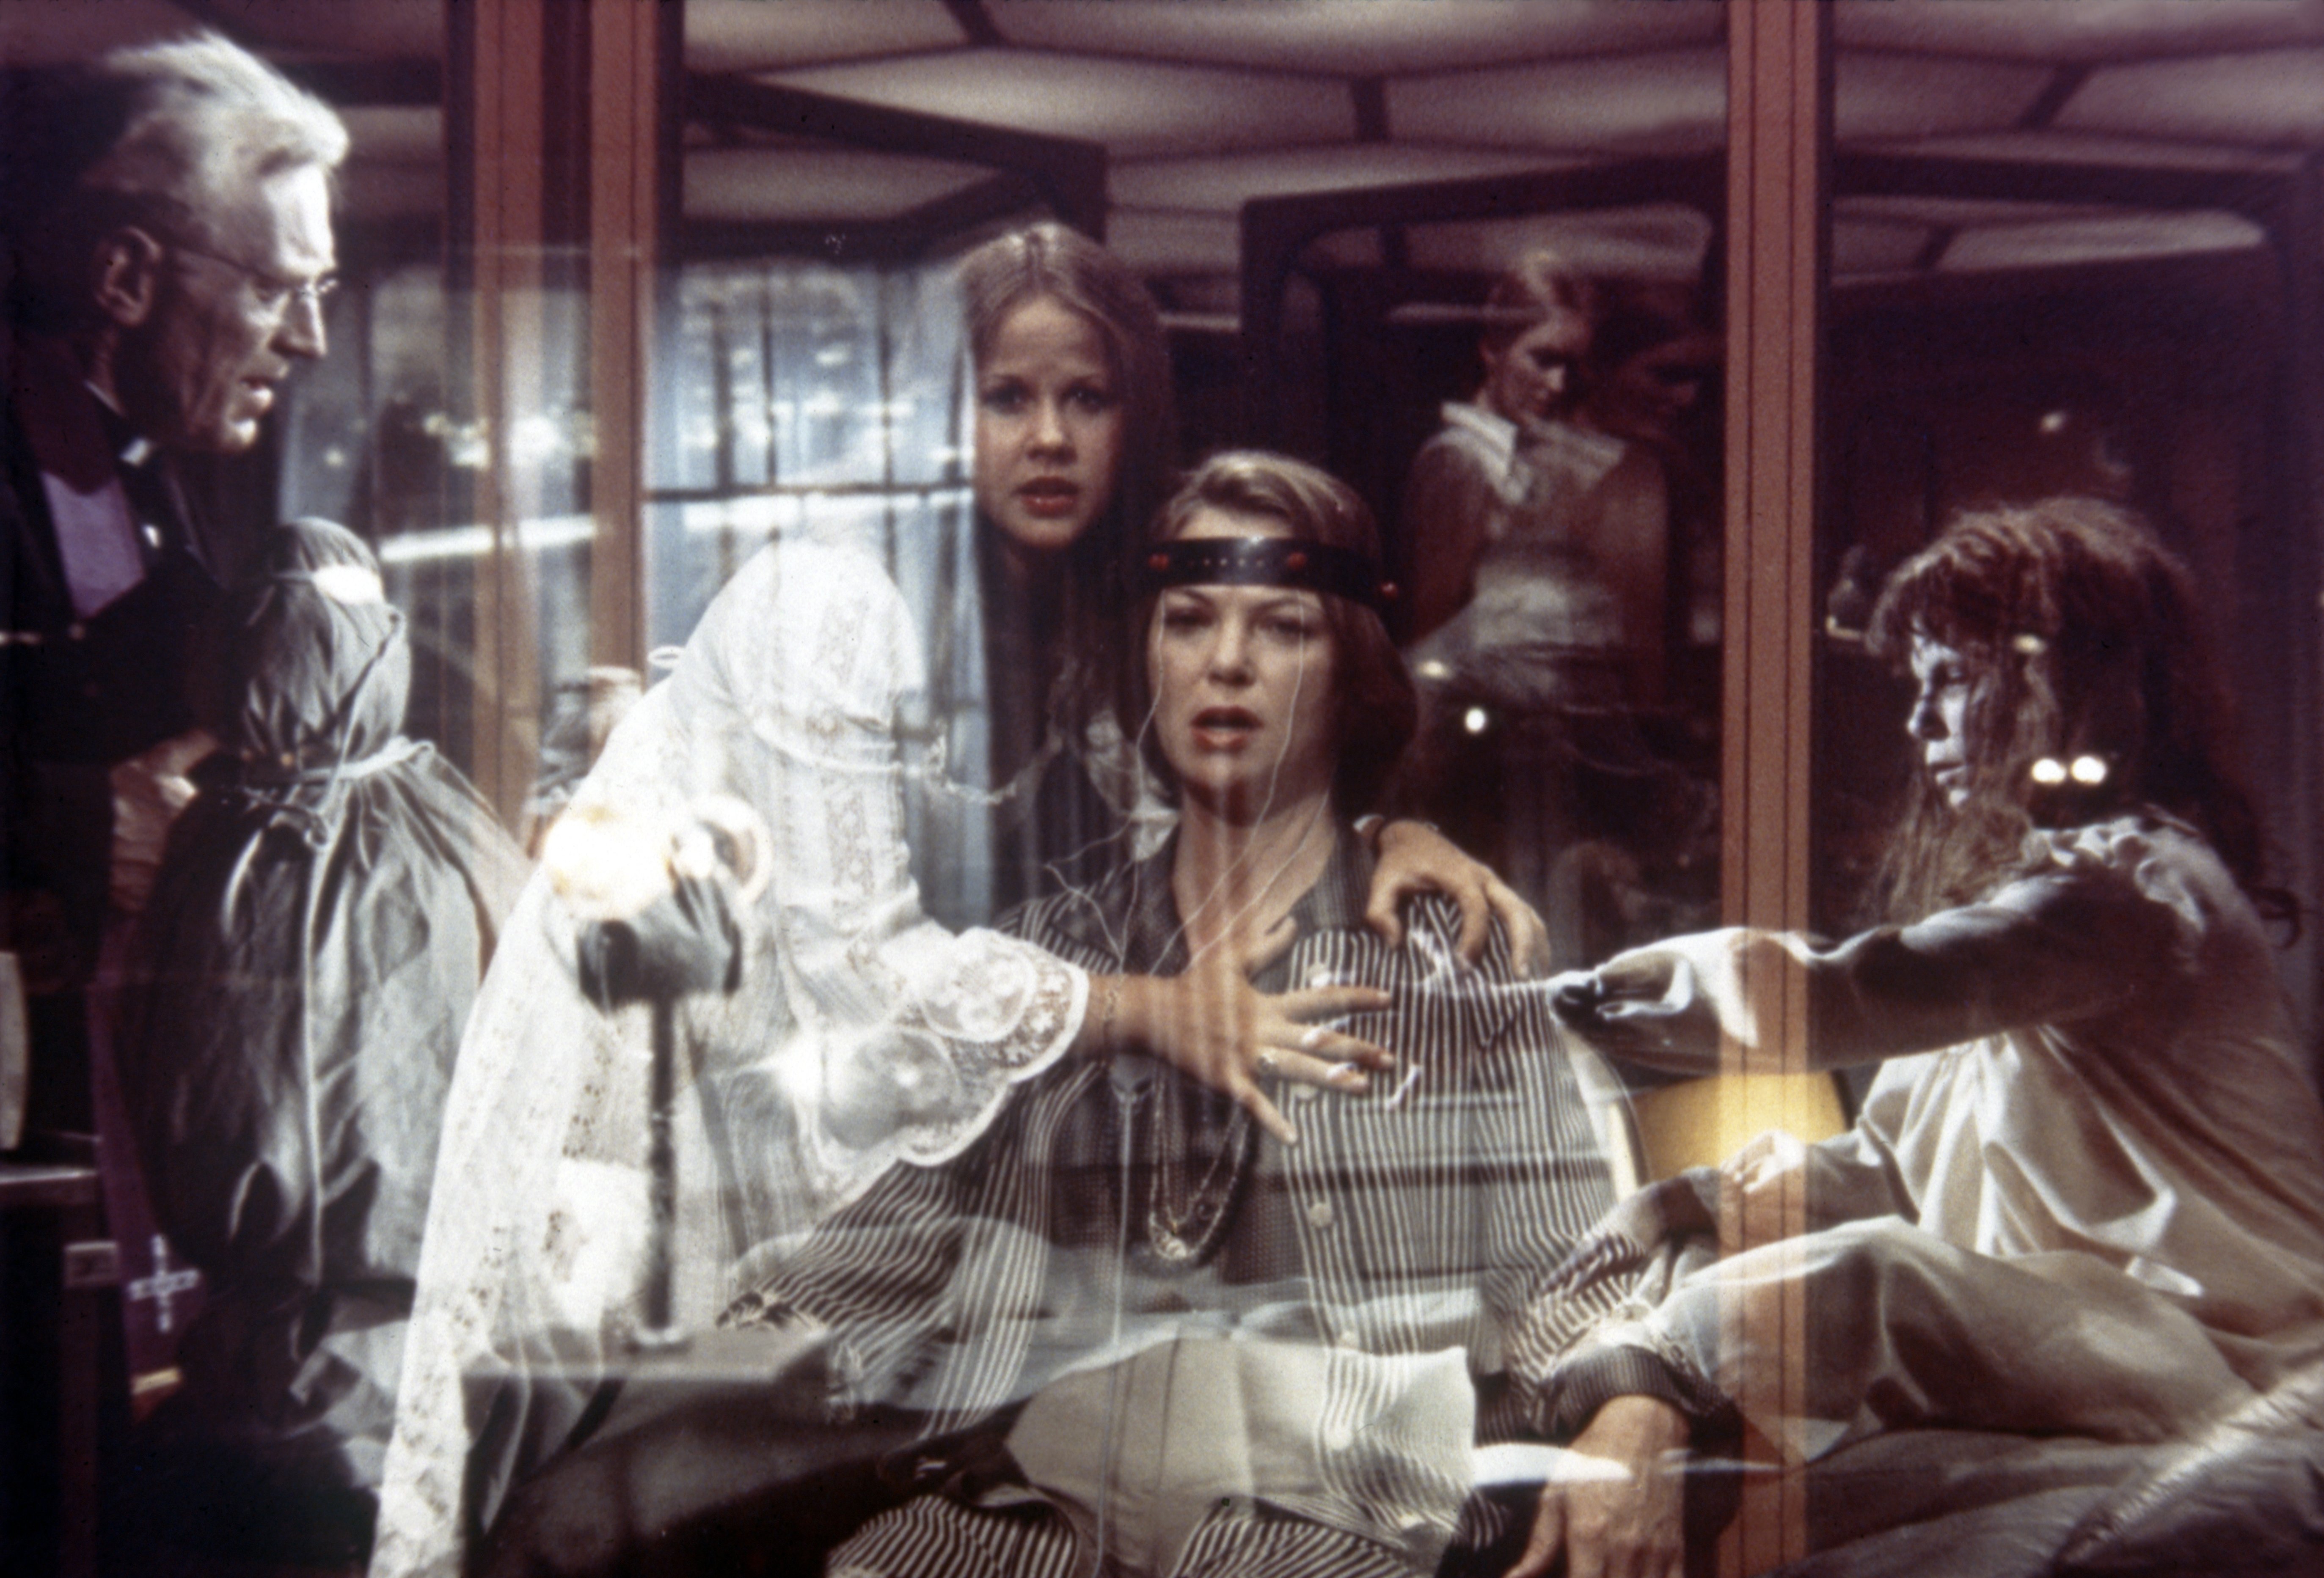 On the set of Exorcist II: The Heretic